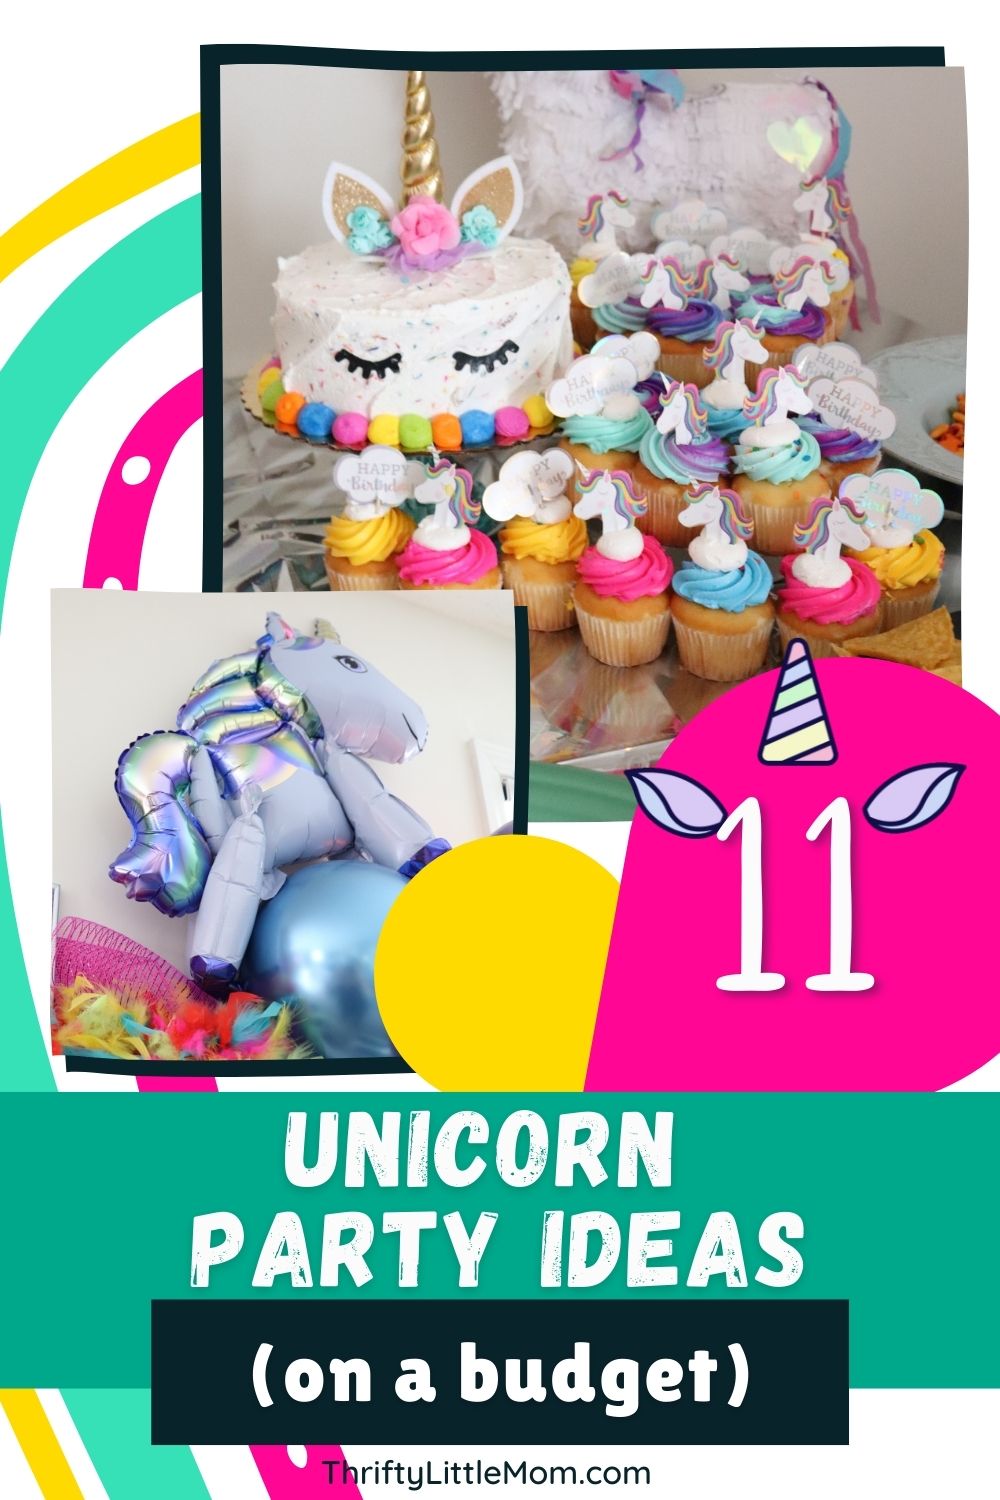 COONOE Unicorn Cake Topper,Unicorn Headband,Handmade Party Cake Decoration Supplies with Eyelashes,Reusable Gold Horn for Birthday Party,Baby Shower Wedding 